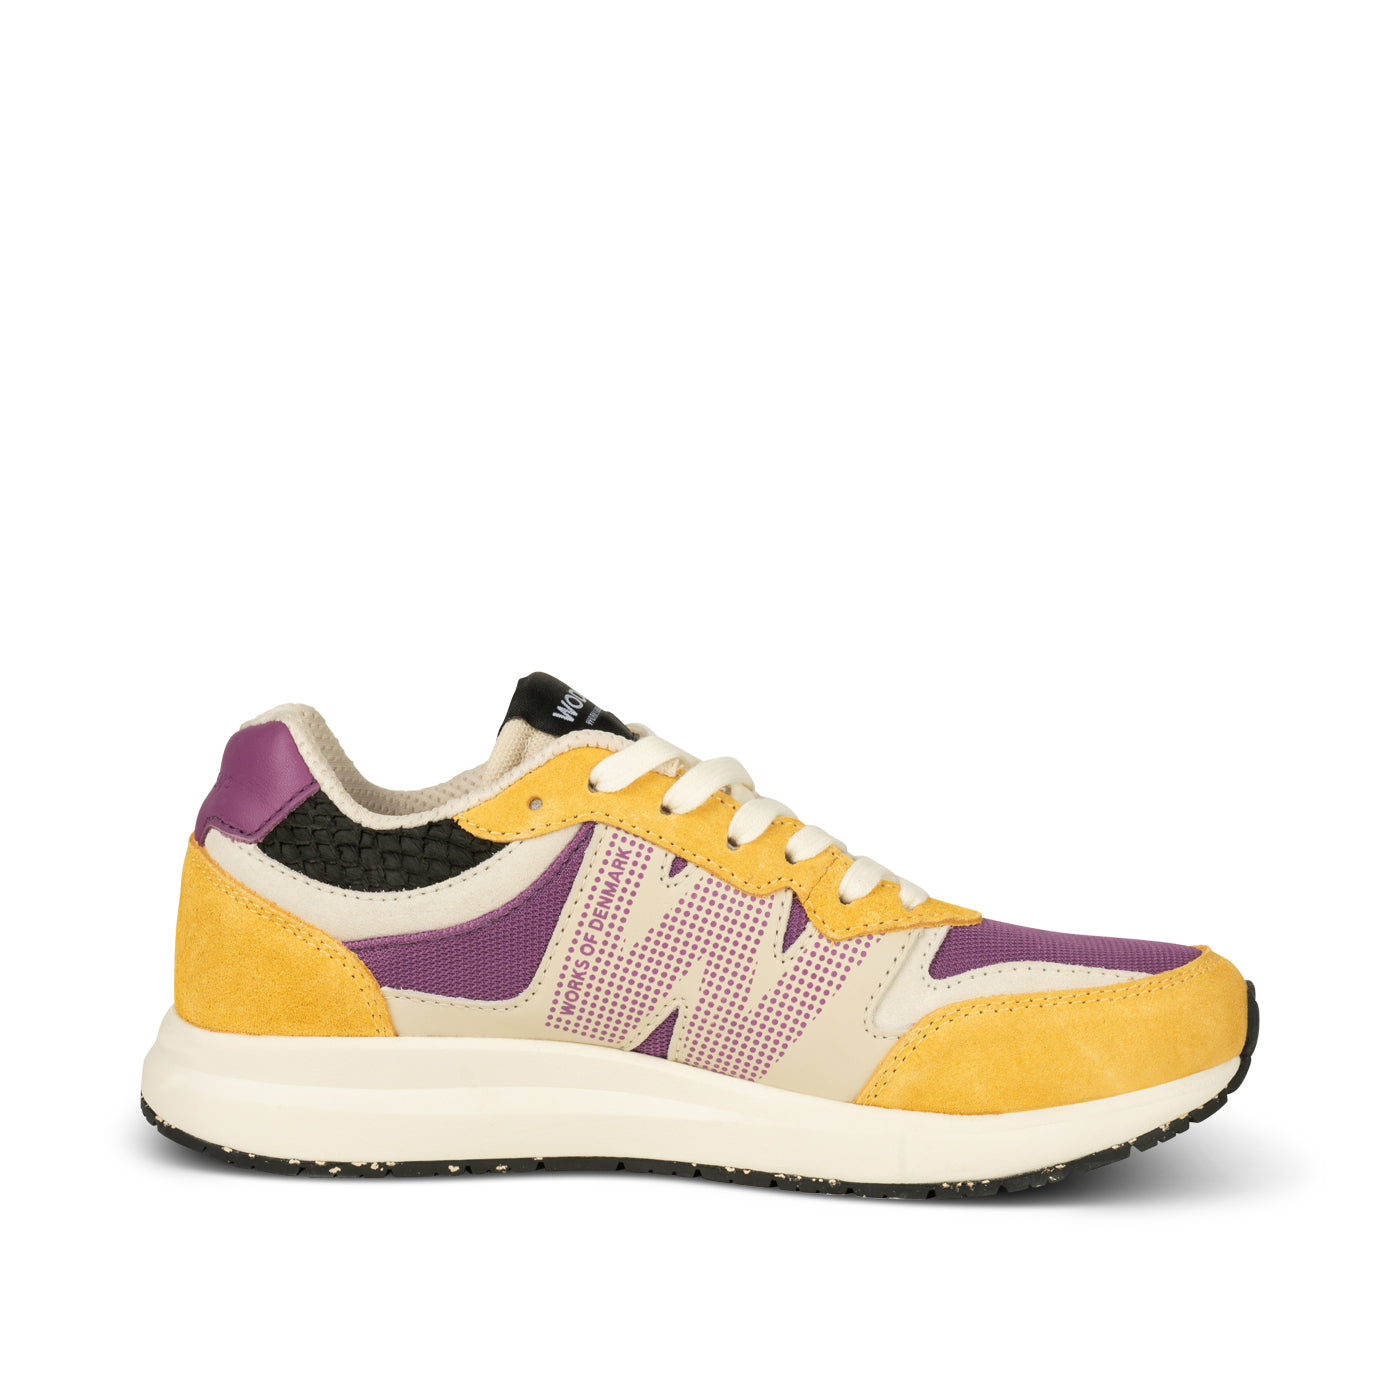 WODEN Rigmor Sneakers 108 Old Gold/Amethyst